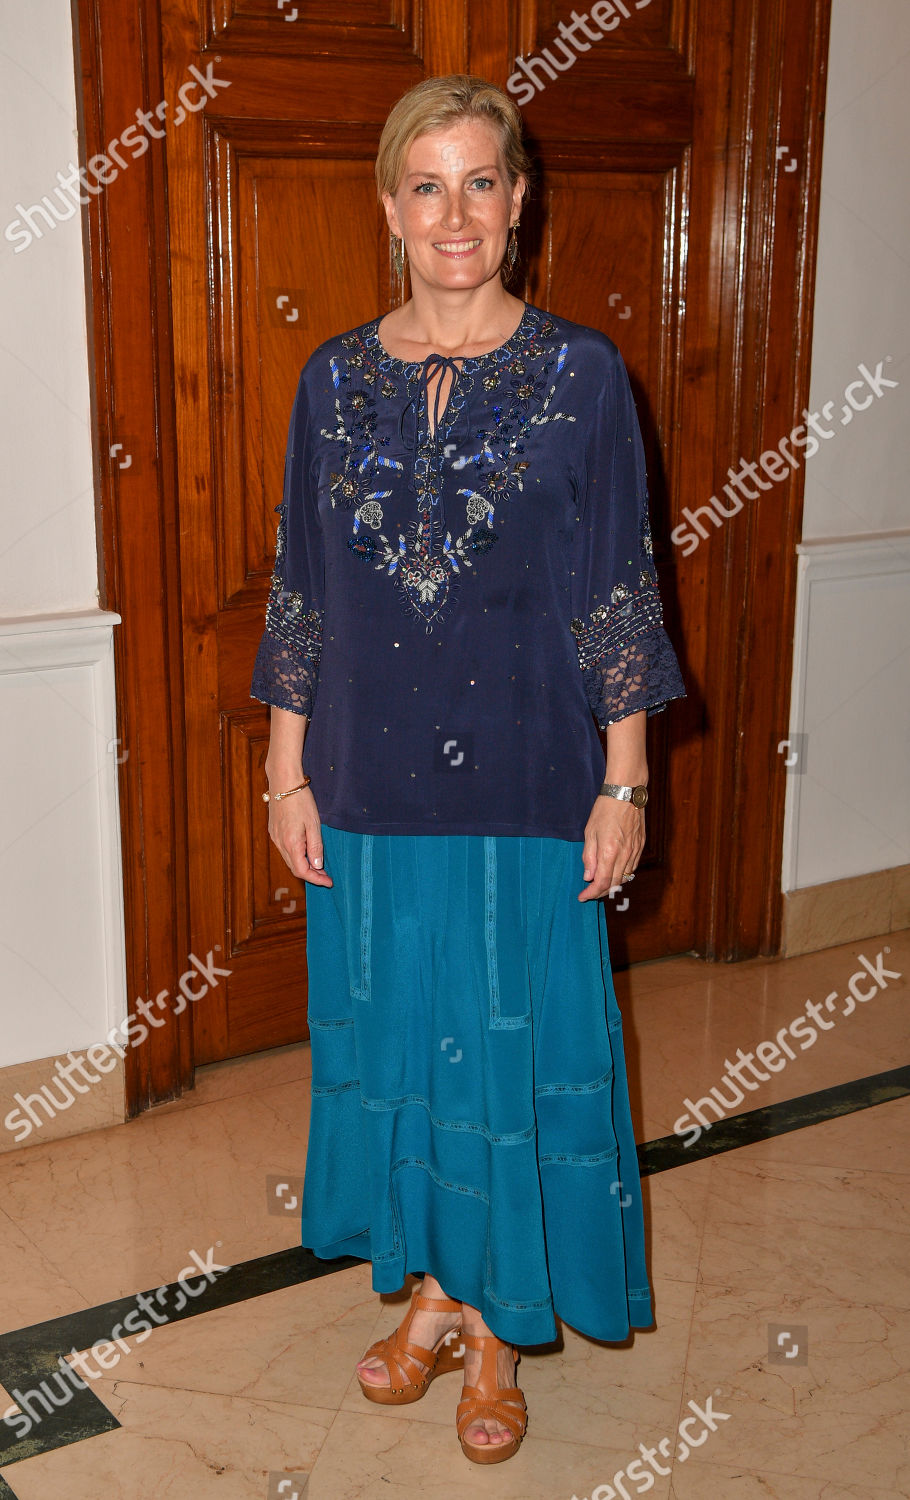 sophie-countess-of-wessex-visit-to-india-shutterstock-editorial-10227195dz.jpg